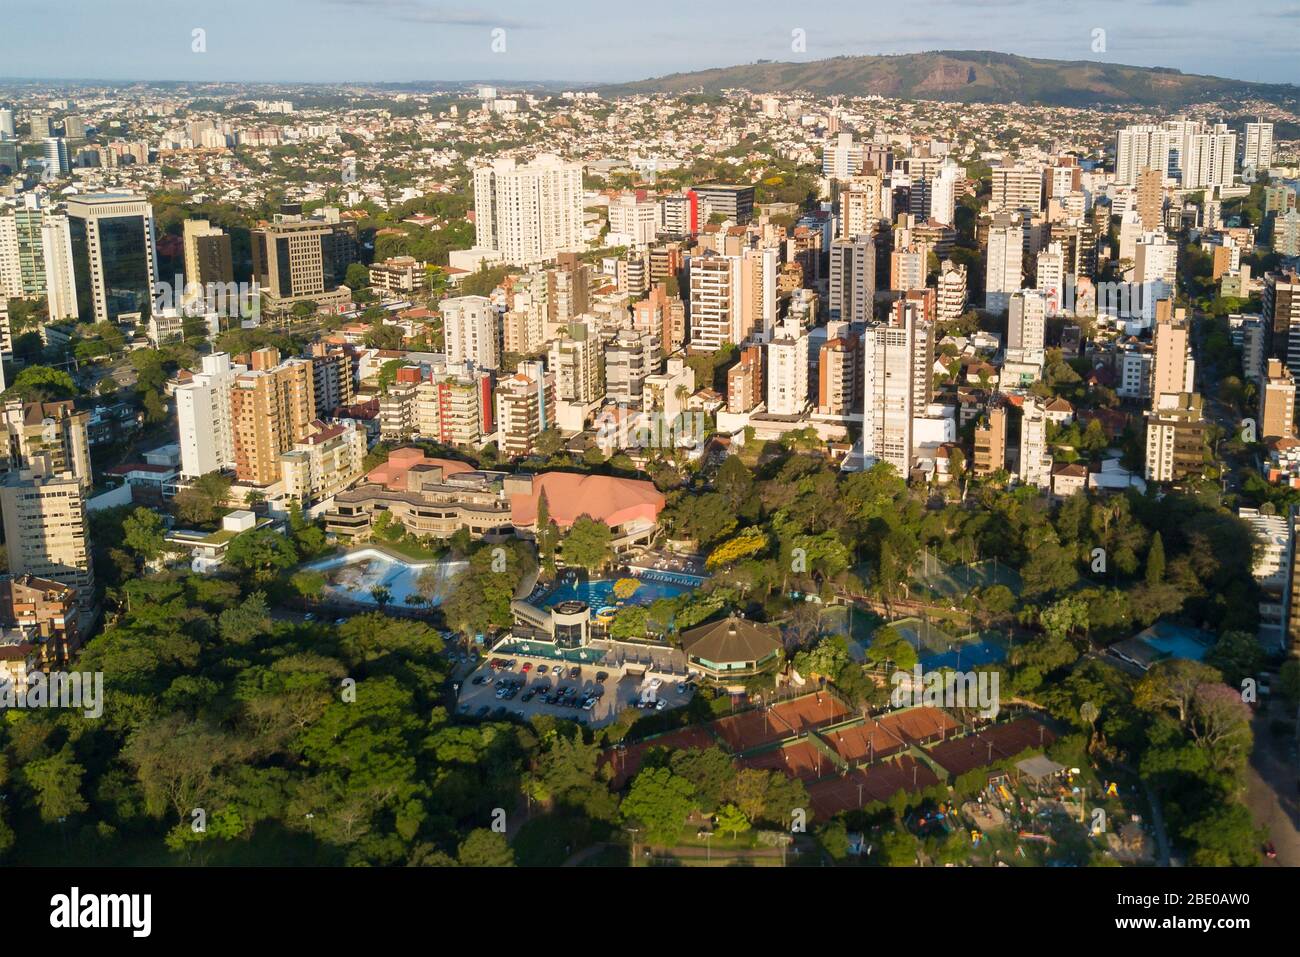 Porto Alegre, Rio Grande do Sul state in Brazil aerial view. Afternoon Upscale residential neighborhood with green area for sports practice. Stock Photo